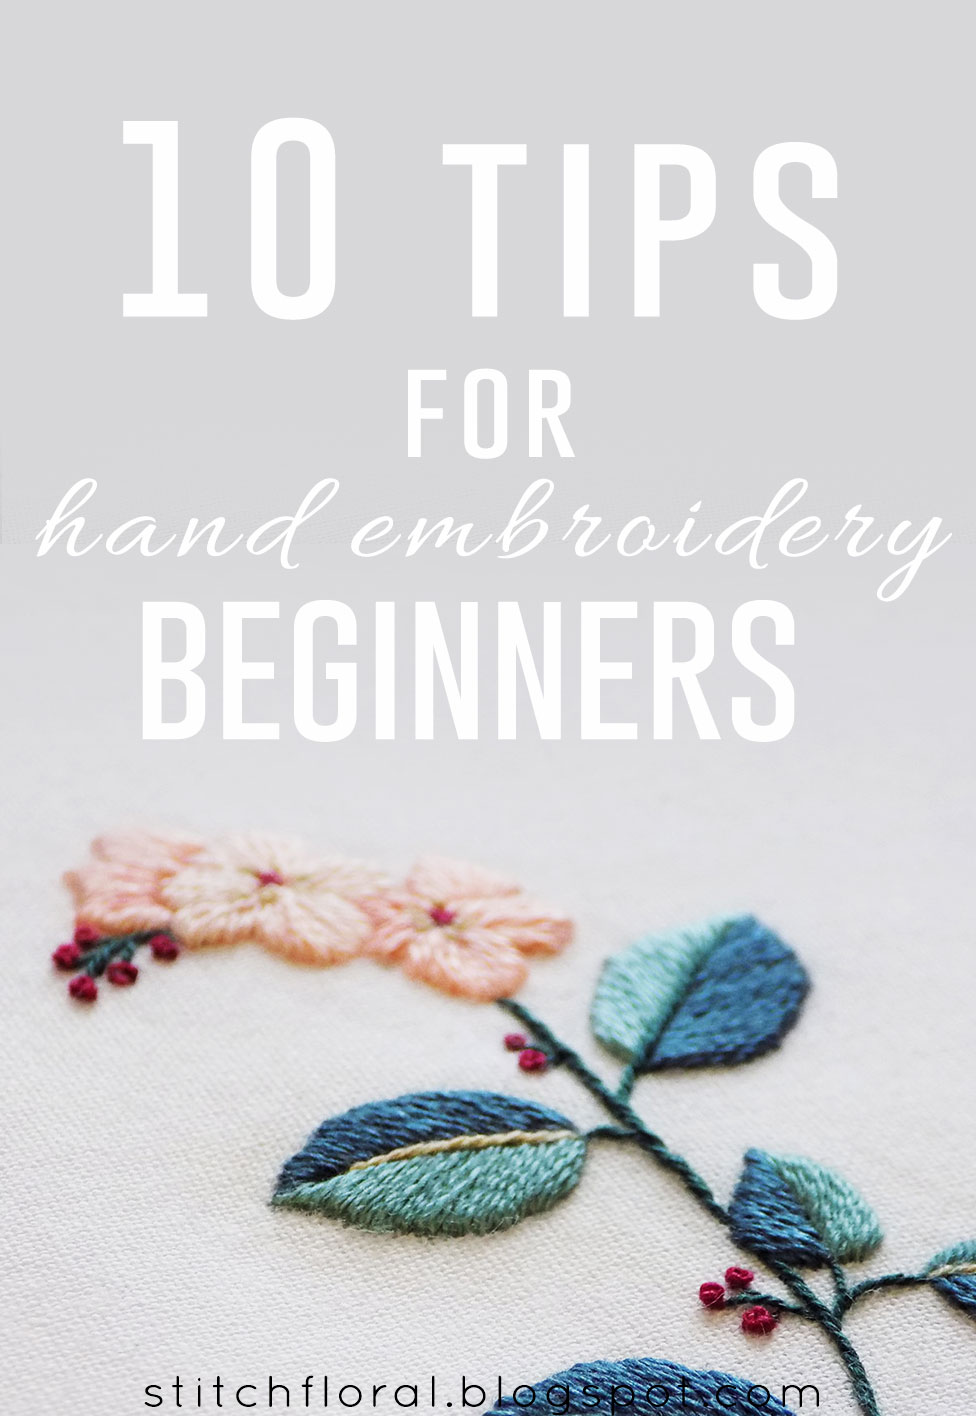 My favorite hand embroidery tools - And Other Adventures Embroidery Co